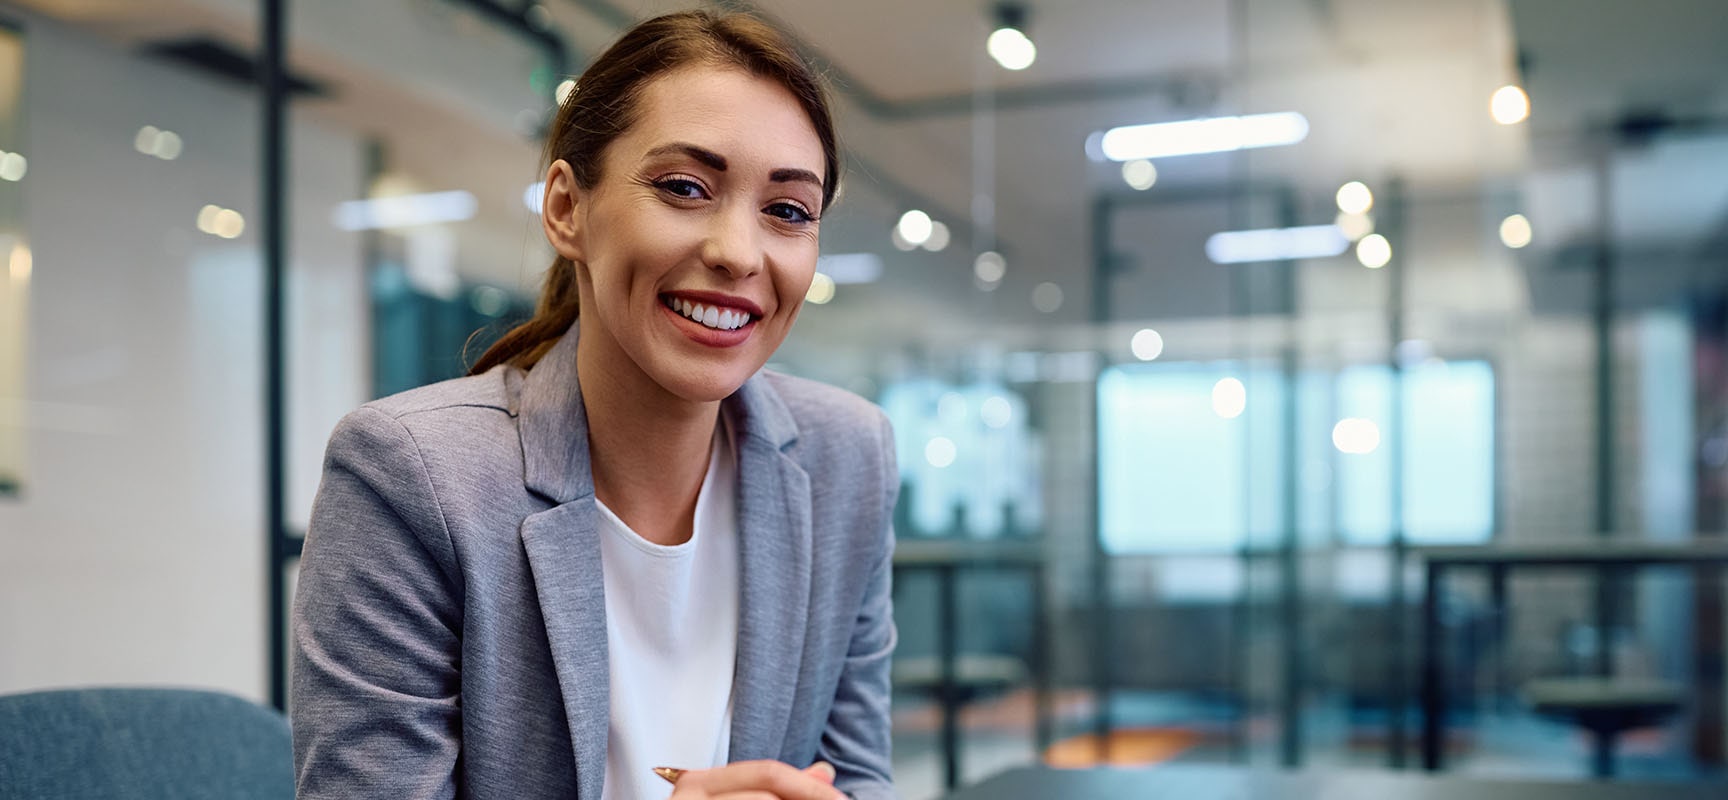 Smiling professional woman in an office